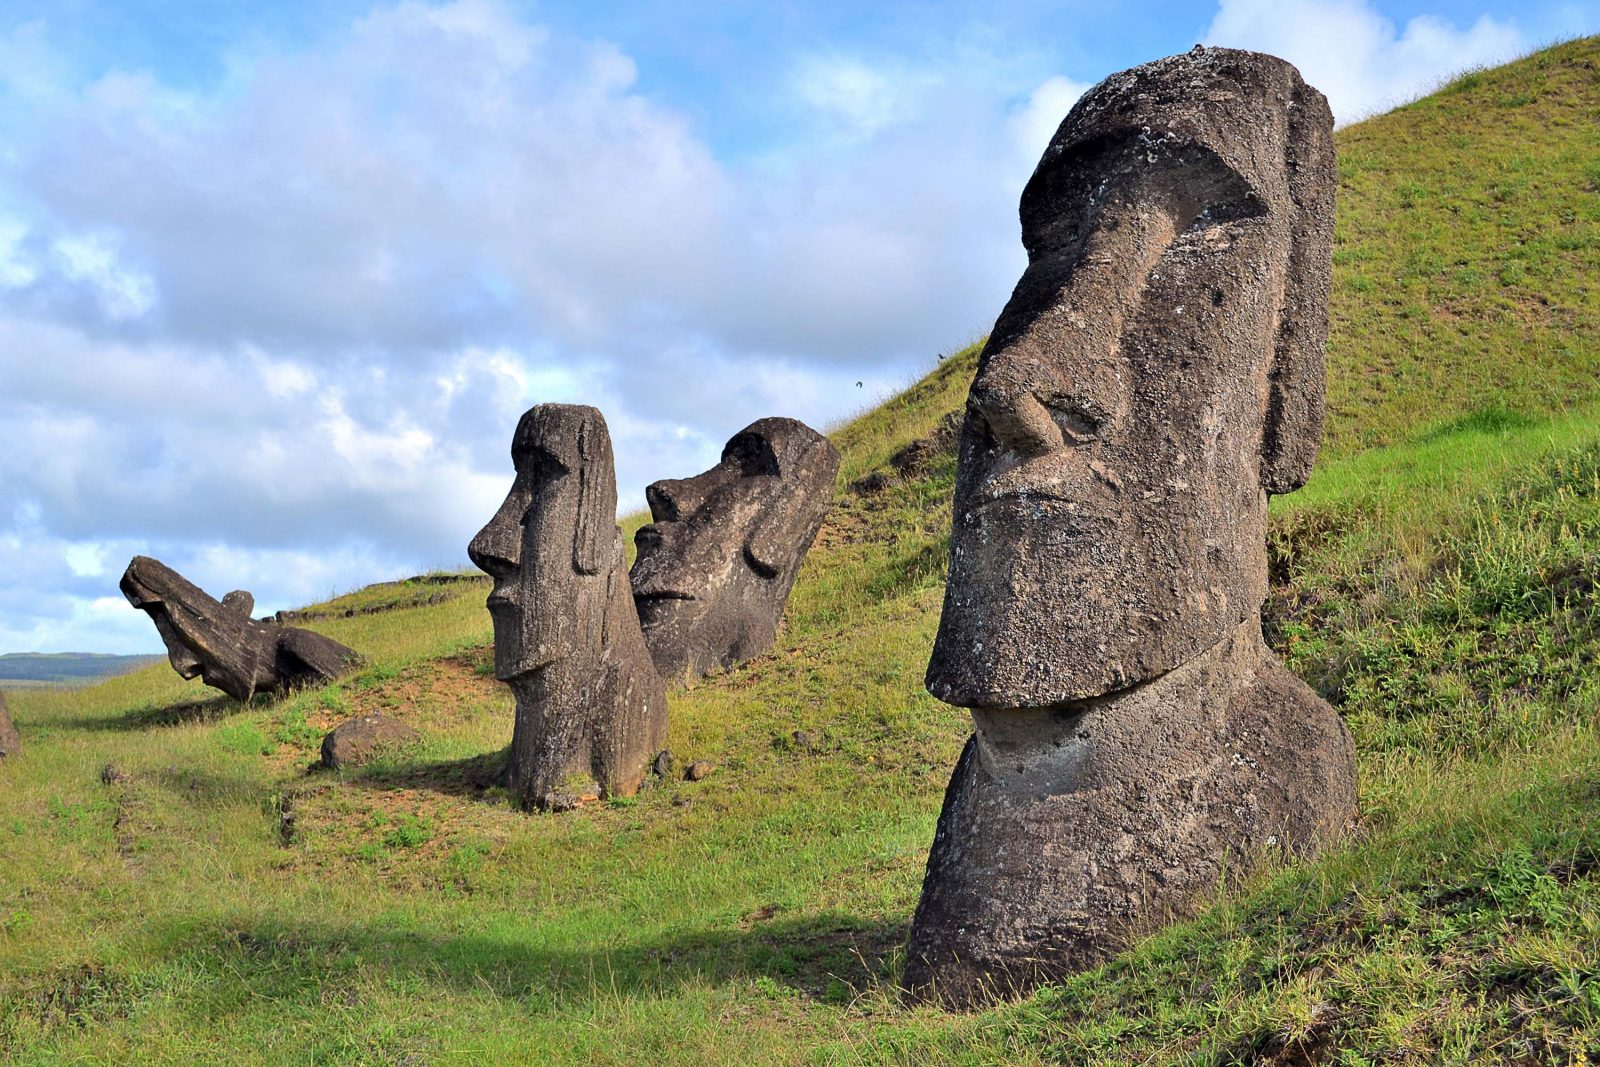 Passing This Geography Quiz Means You Have a Ton of Knowledge Easter Island Moai statues, Chile